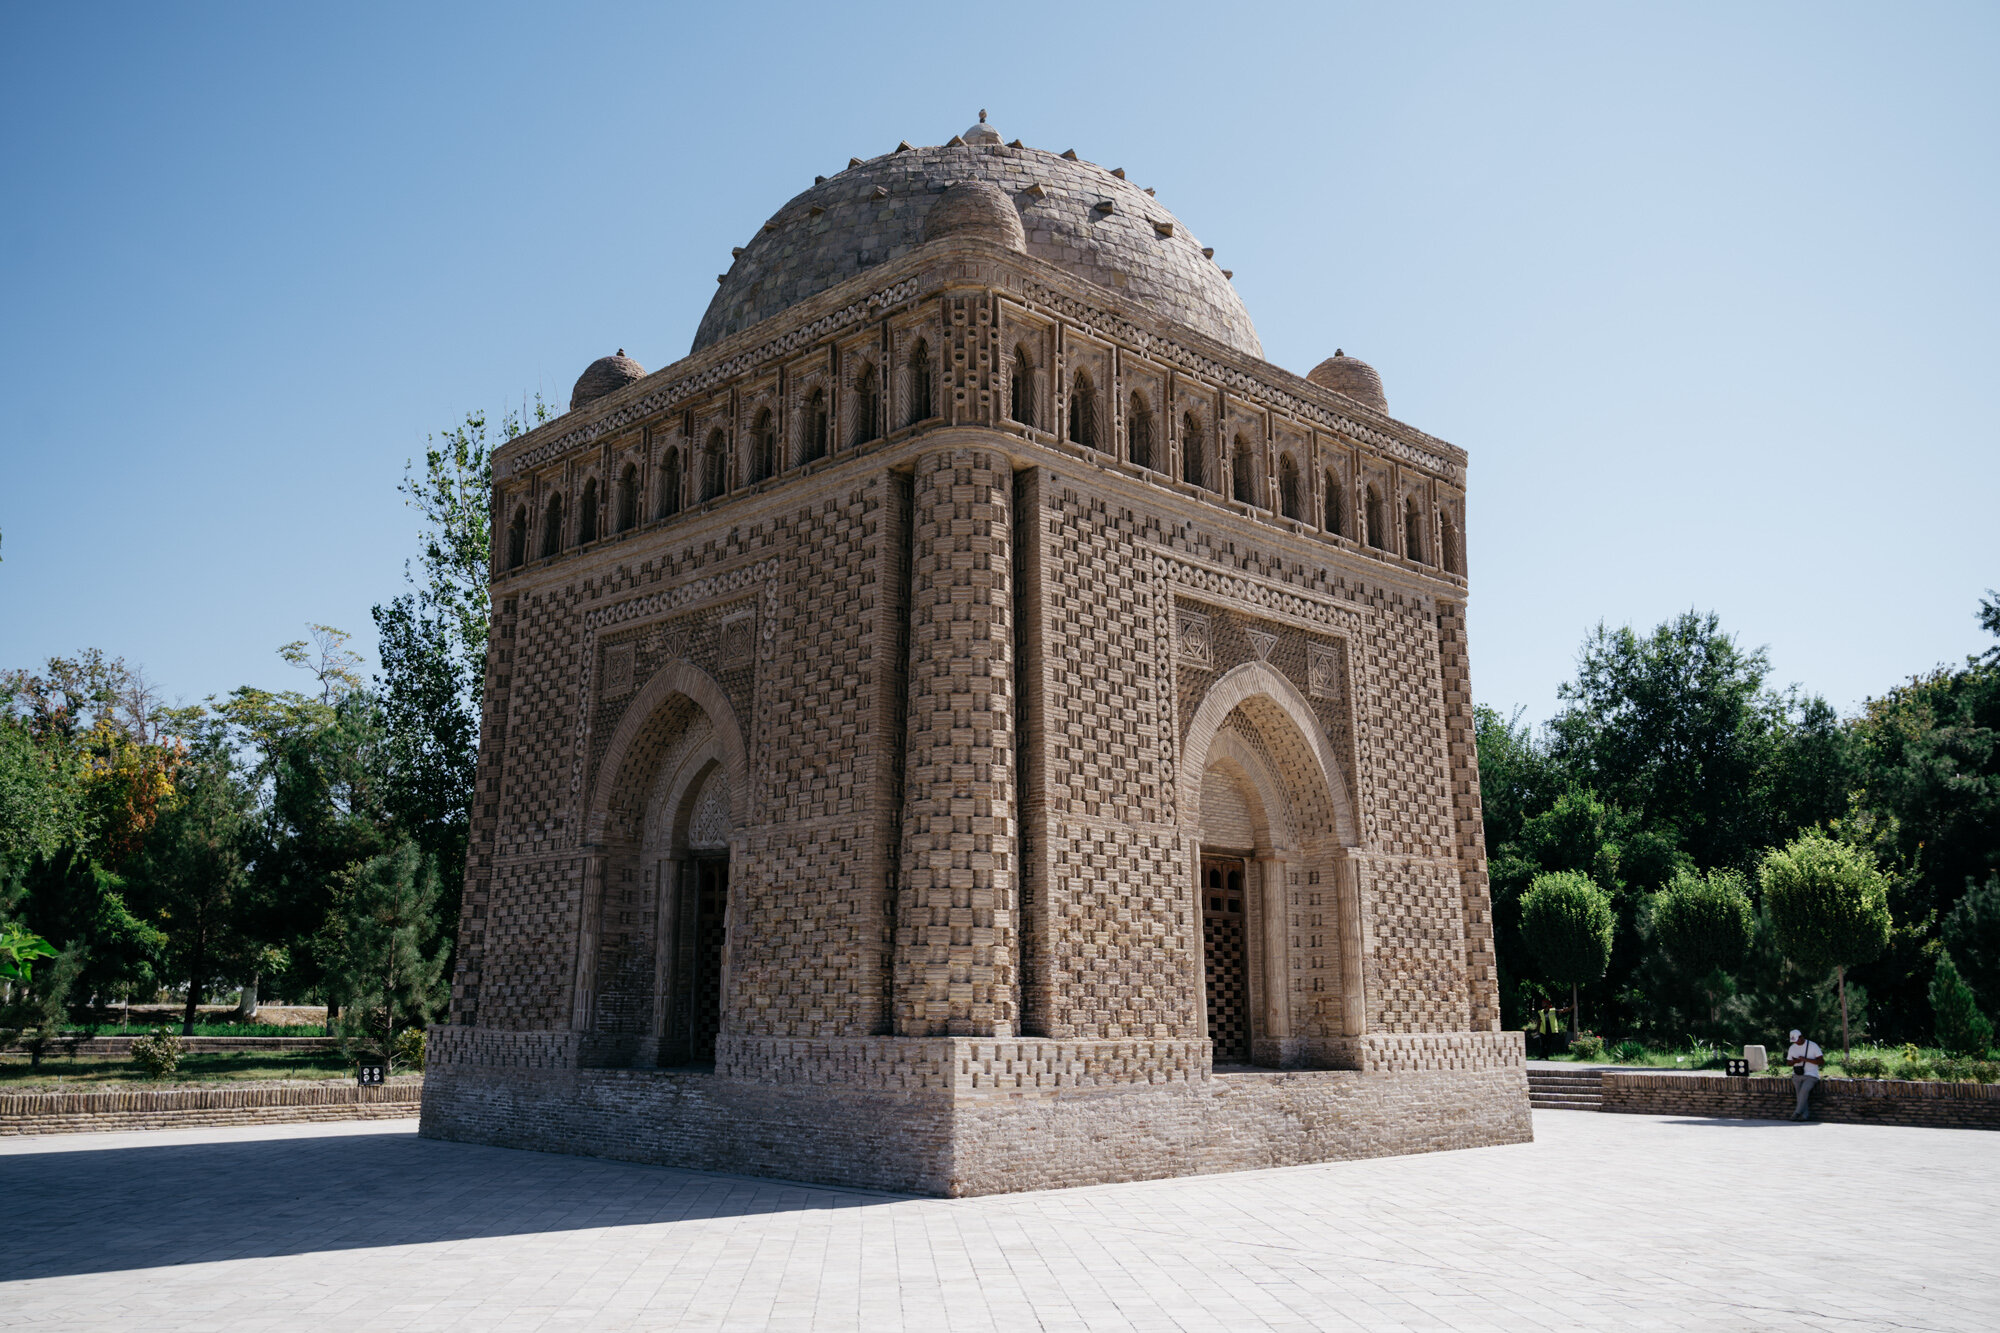  The mausoleum combines multi-cultural building and decorative traditions, such as Sogdian, Sassanian, Persian and even classical and Byzantine architecture 